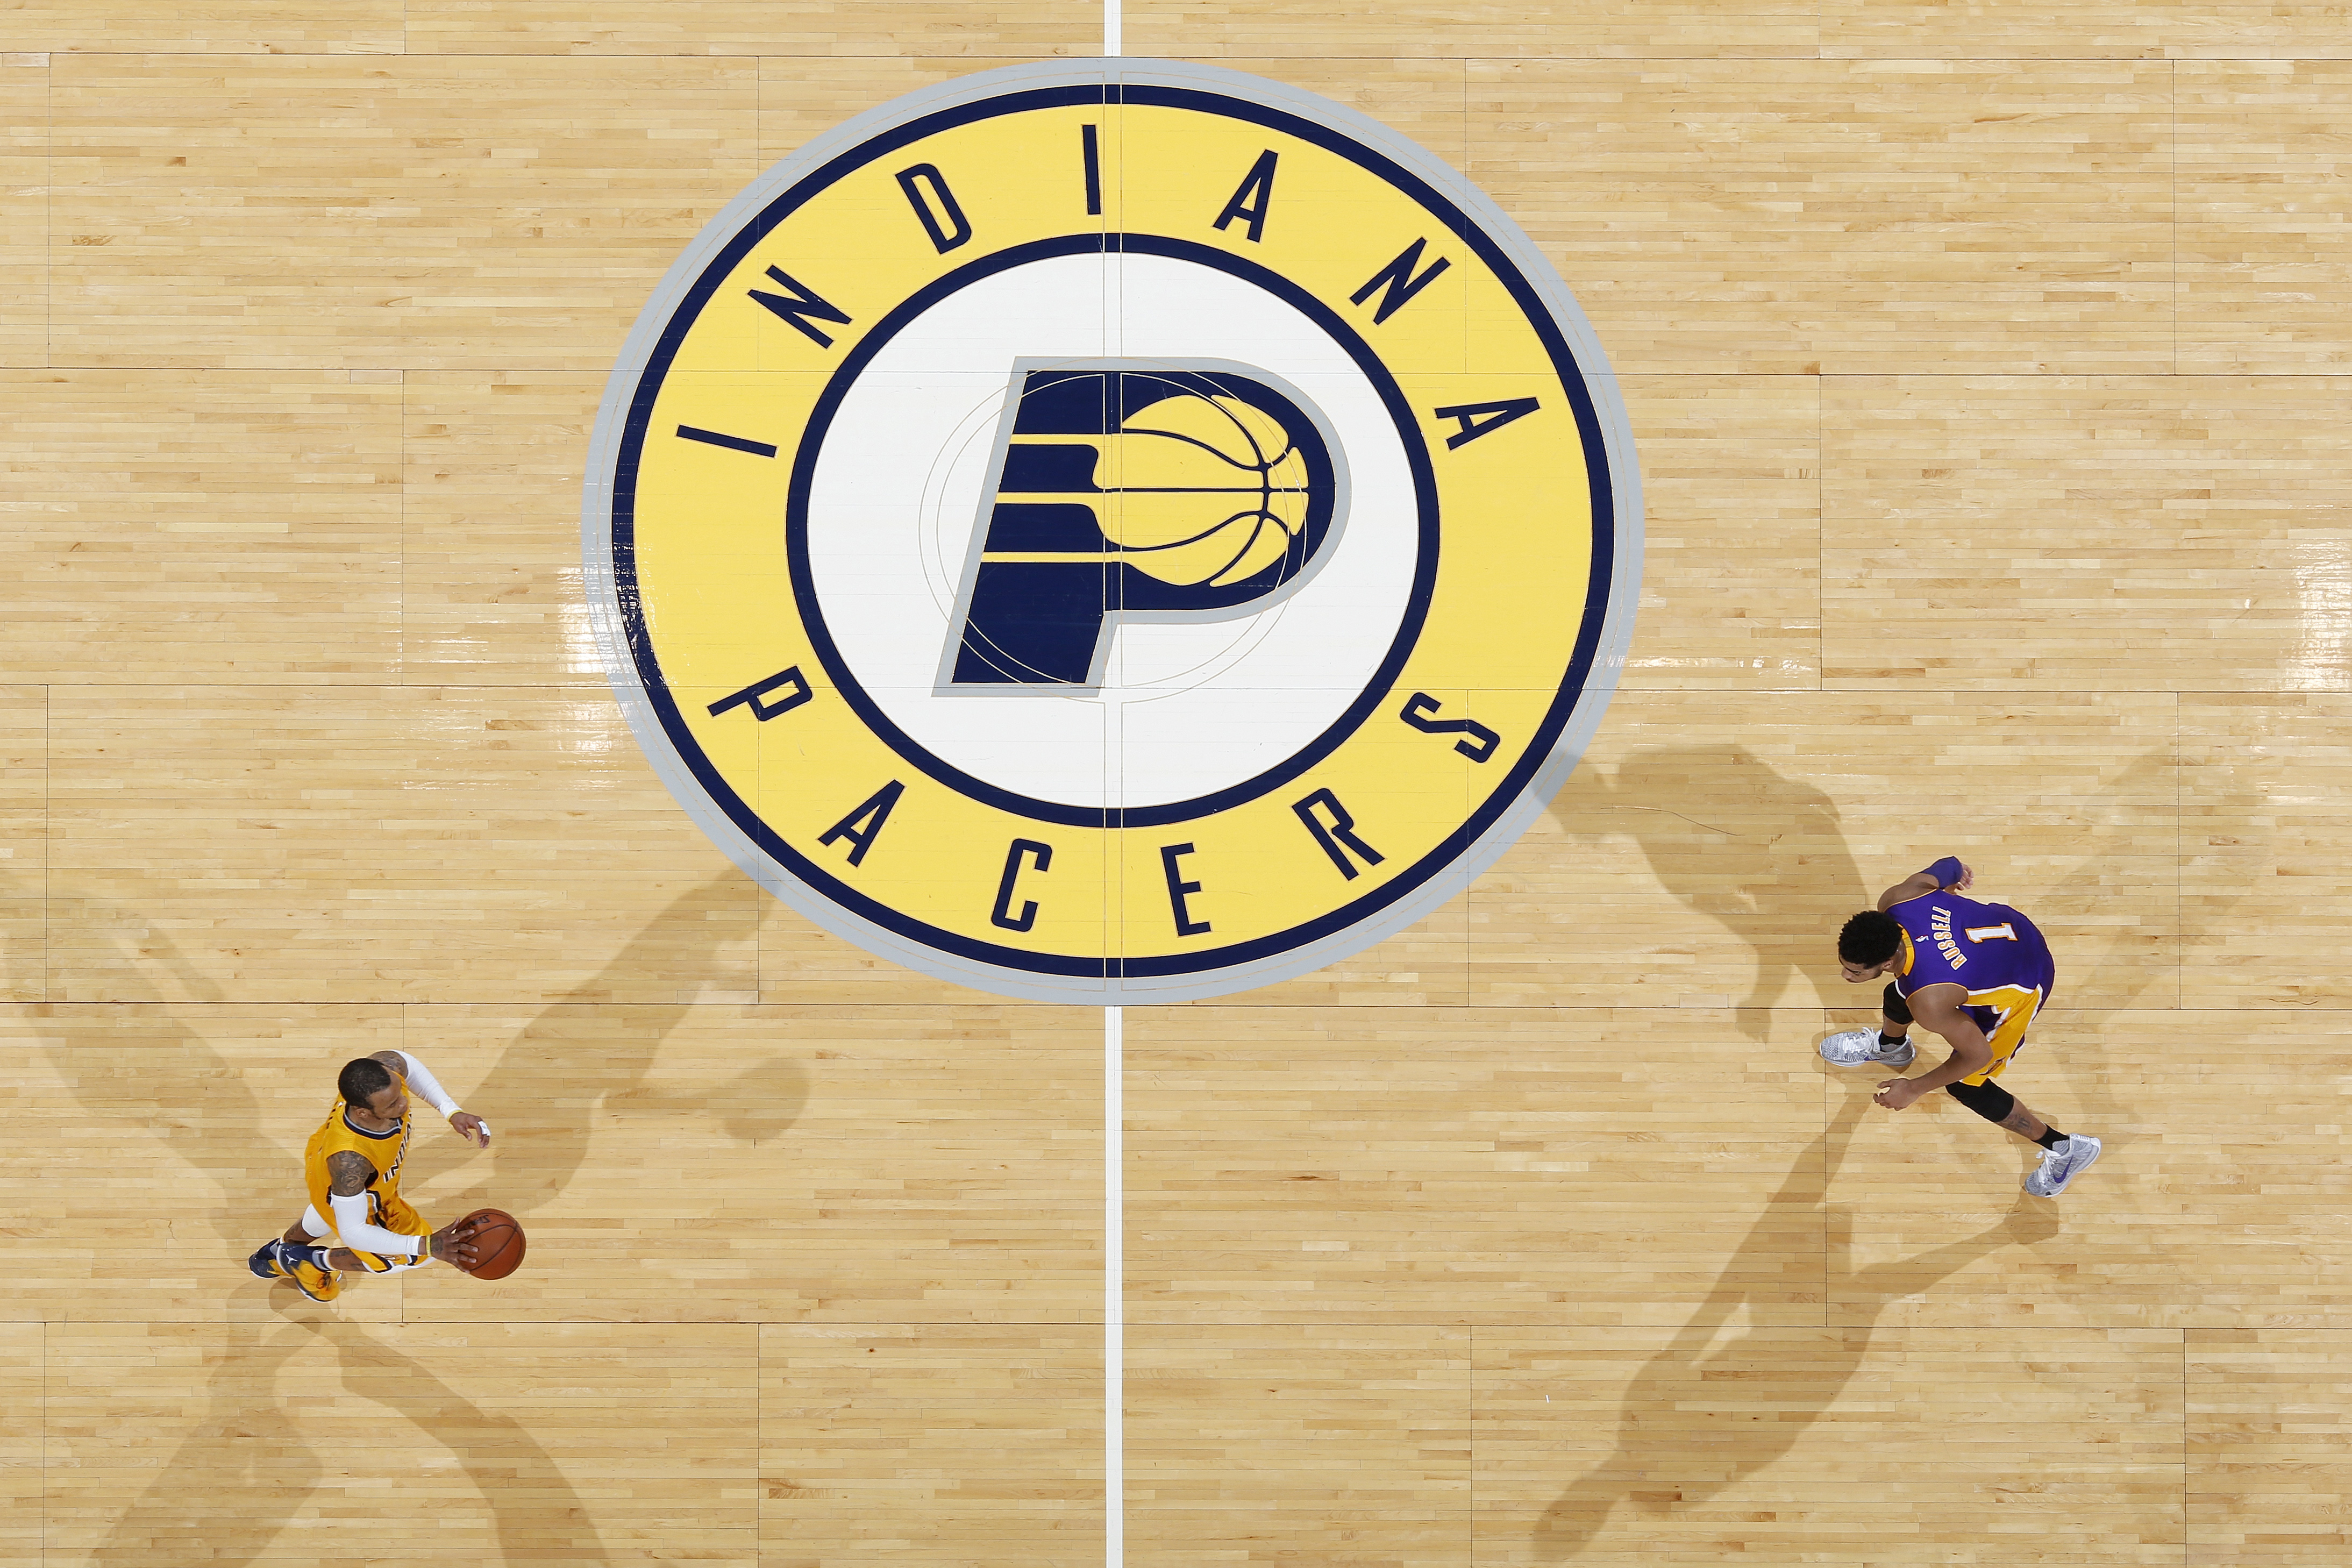 Indiana Pacers' Unveil Amazing New Hoosiers Throwback Uniforms